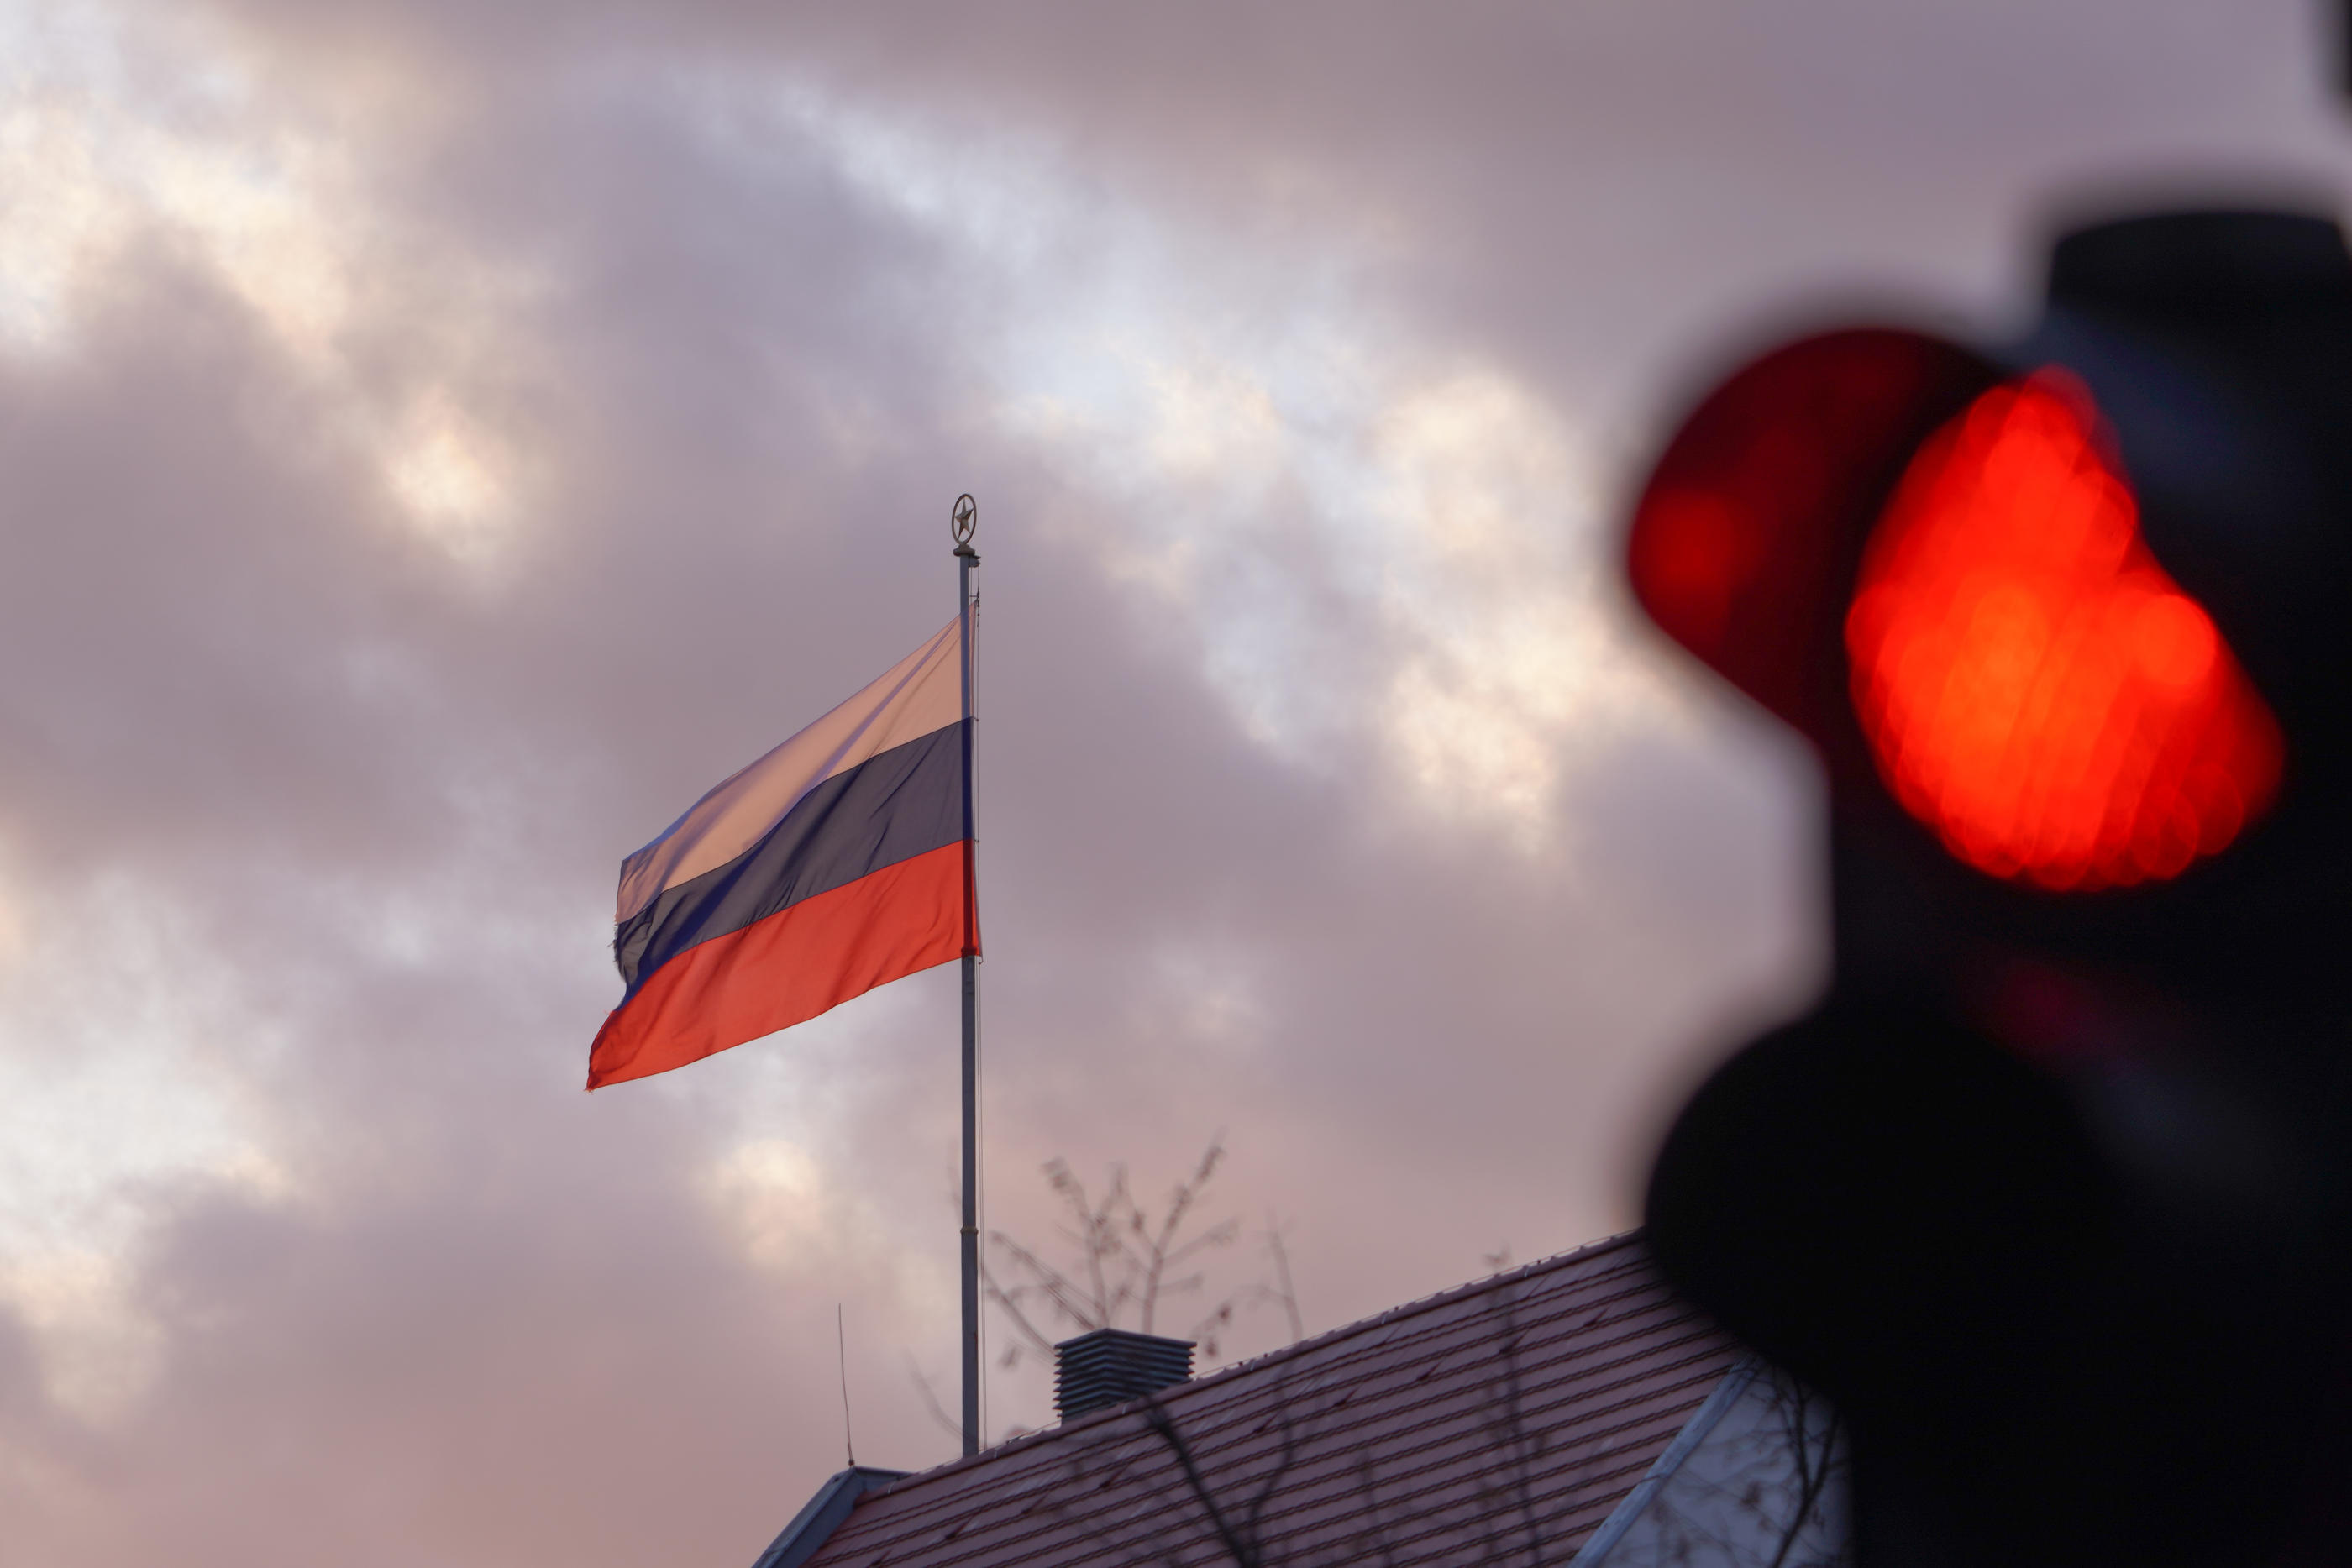 FILED - 24 February 2022, Berlin: The flag of the Russian Embassy flies behind a red traffic light in the early morning. Photo: Joerg Carstensen/dpa - Photo by Icon sport